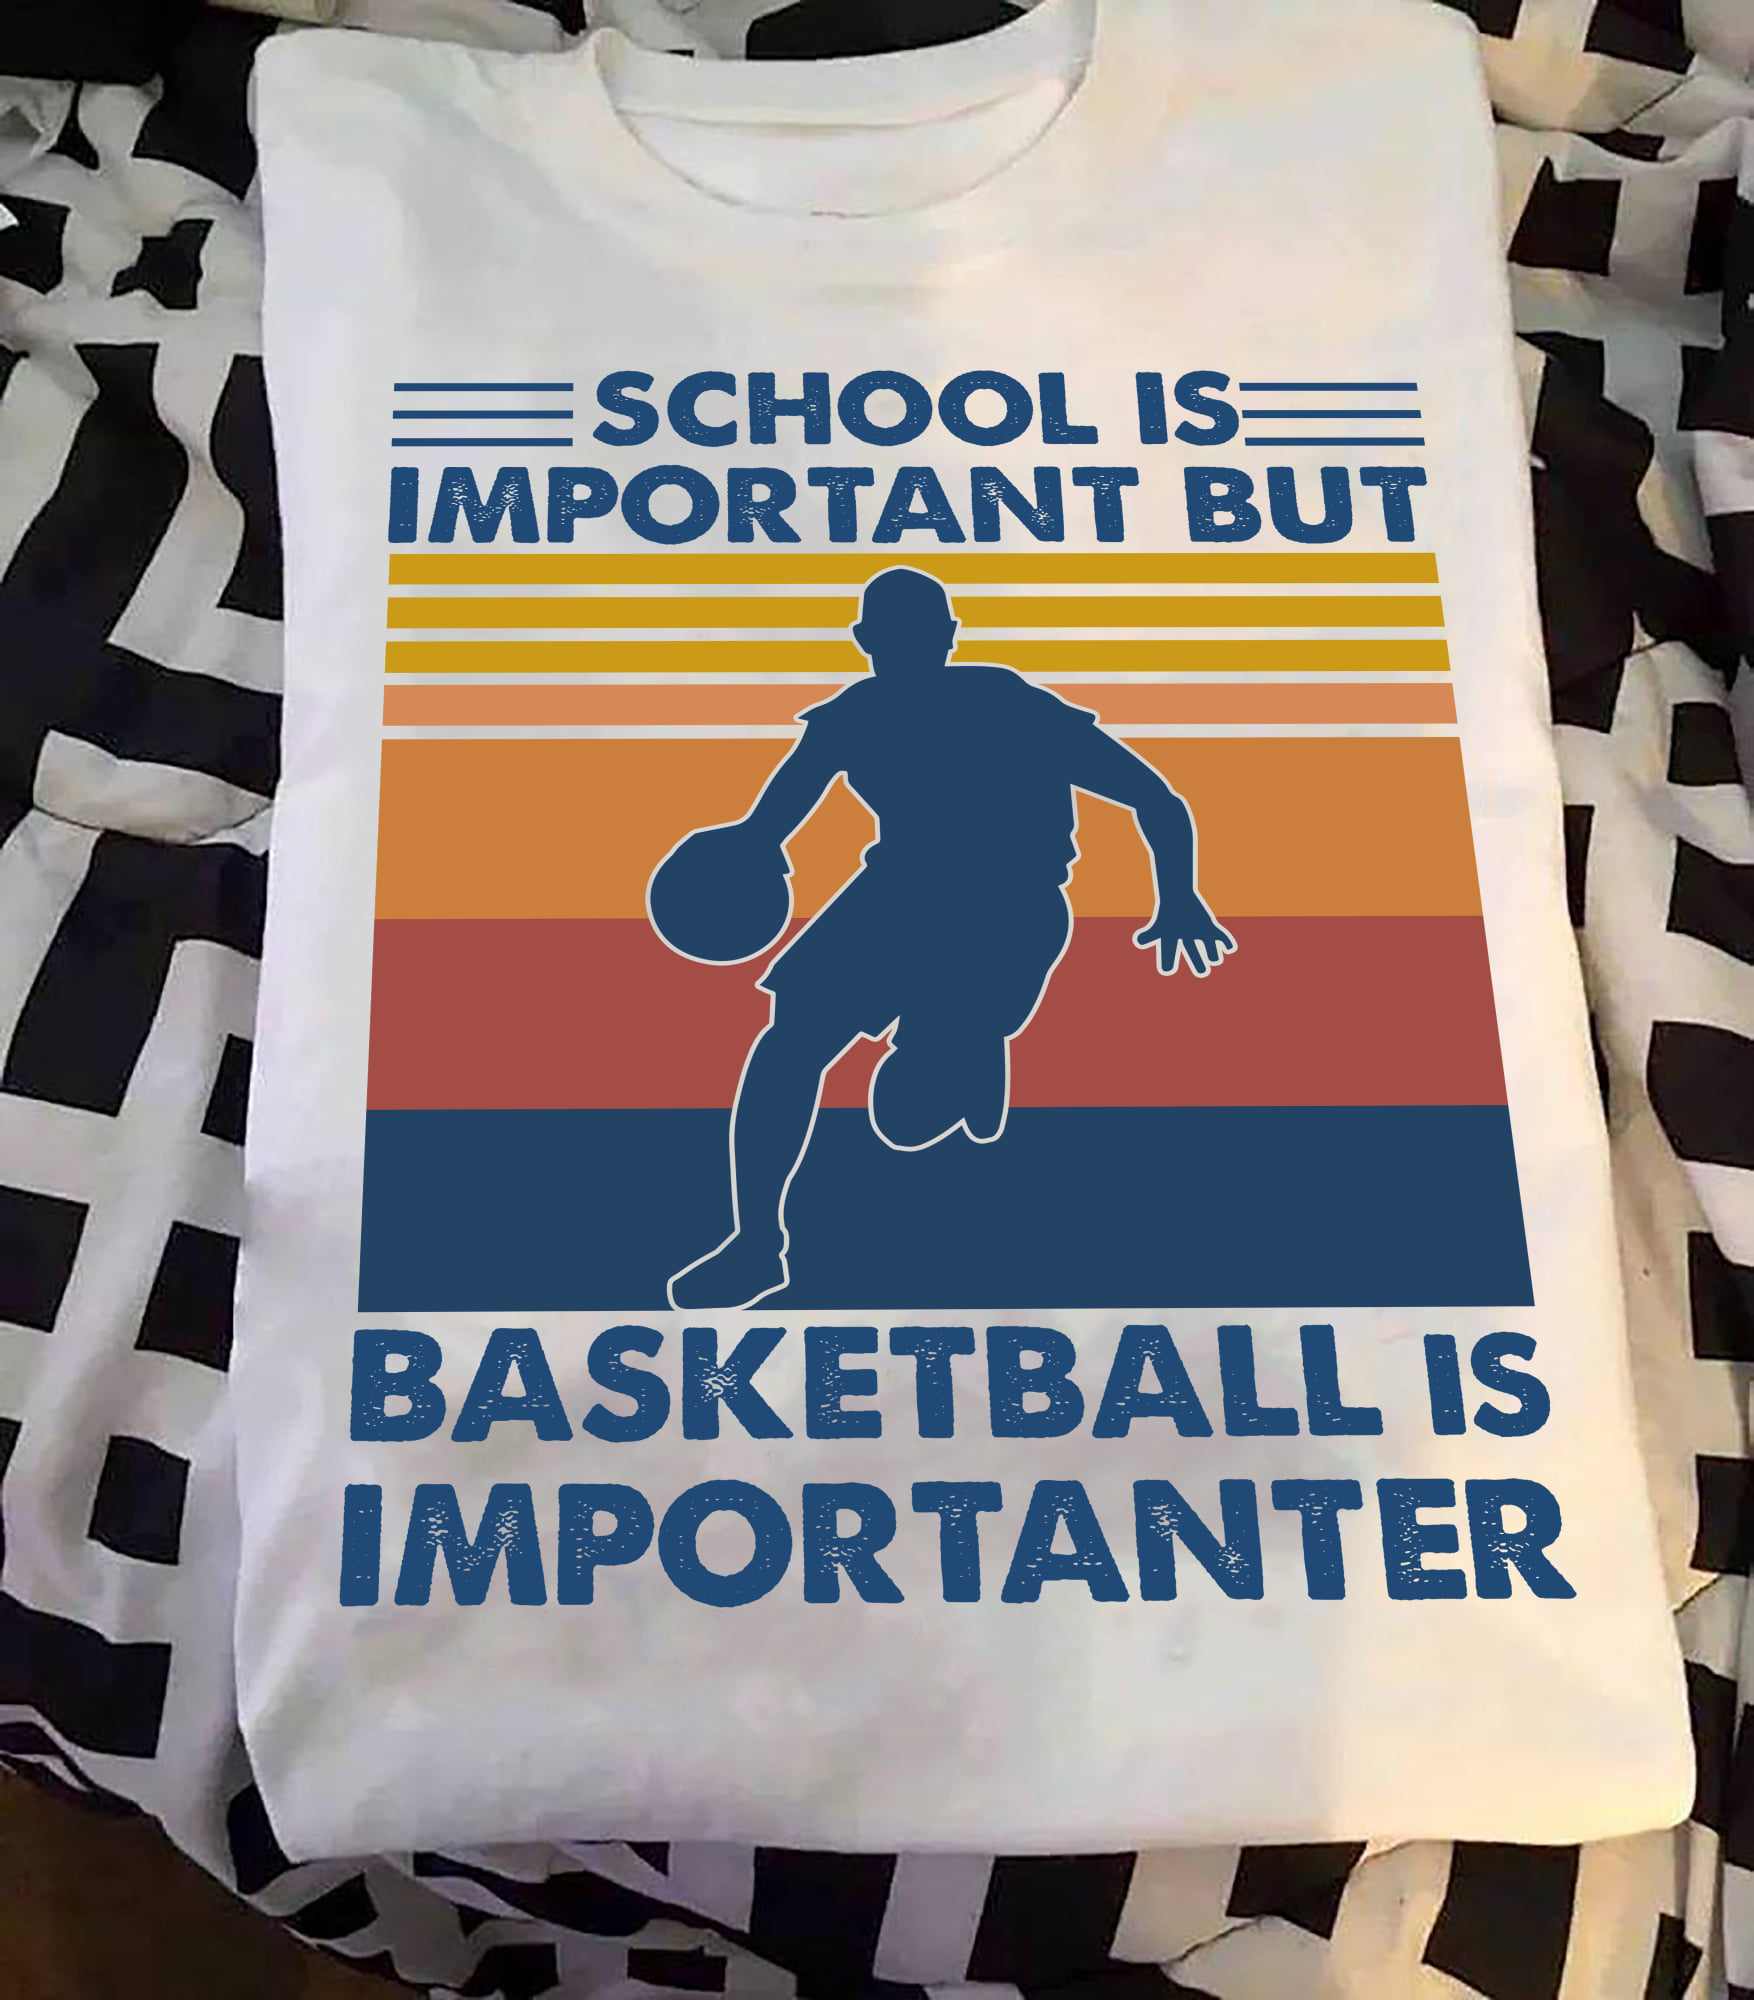 School is important but basketball is importanter